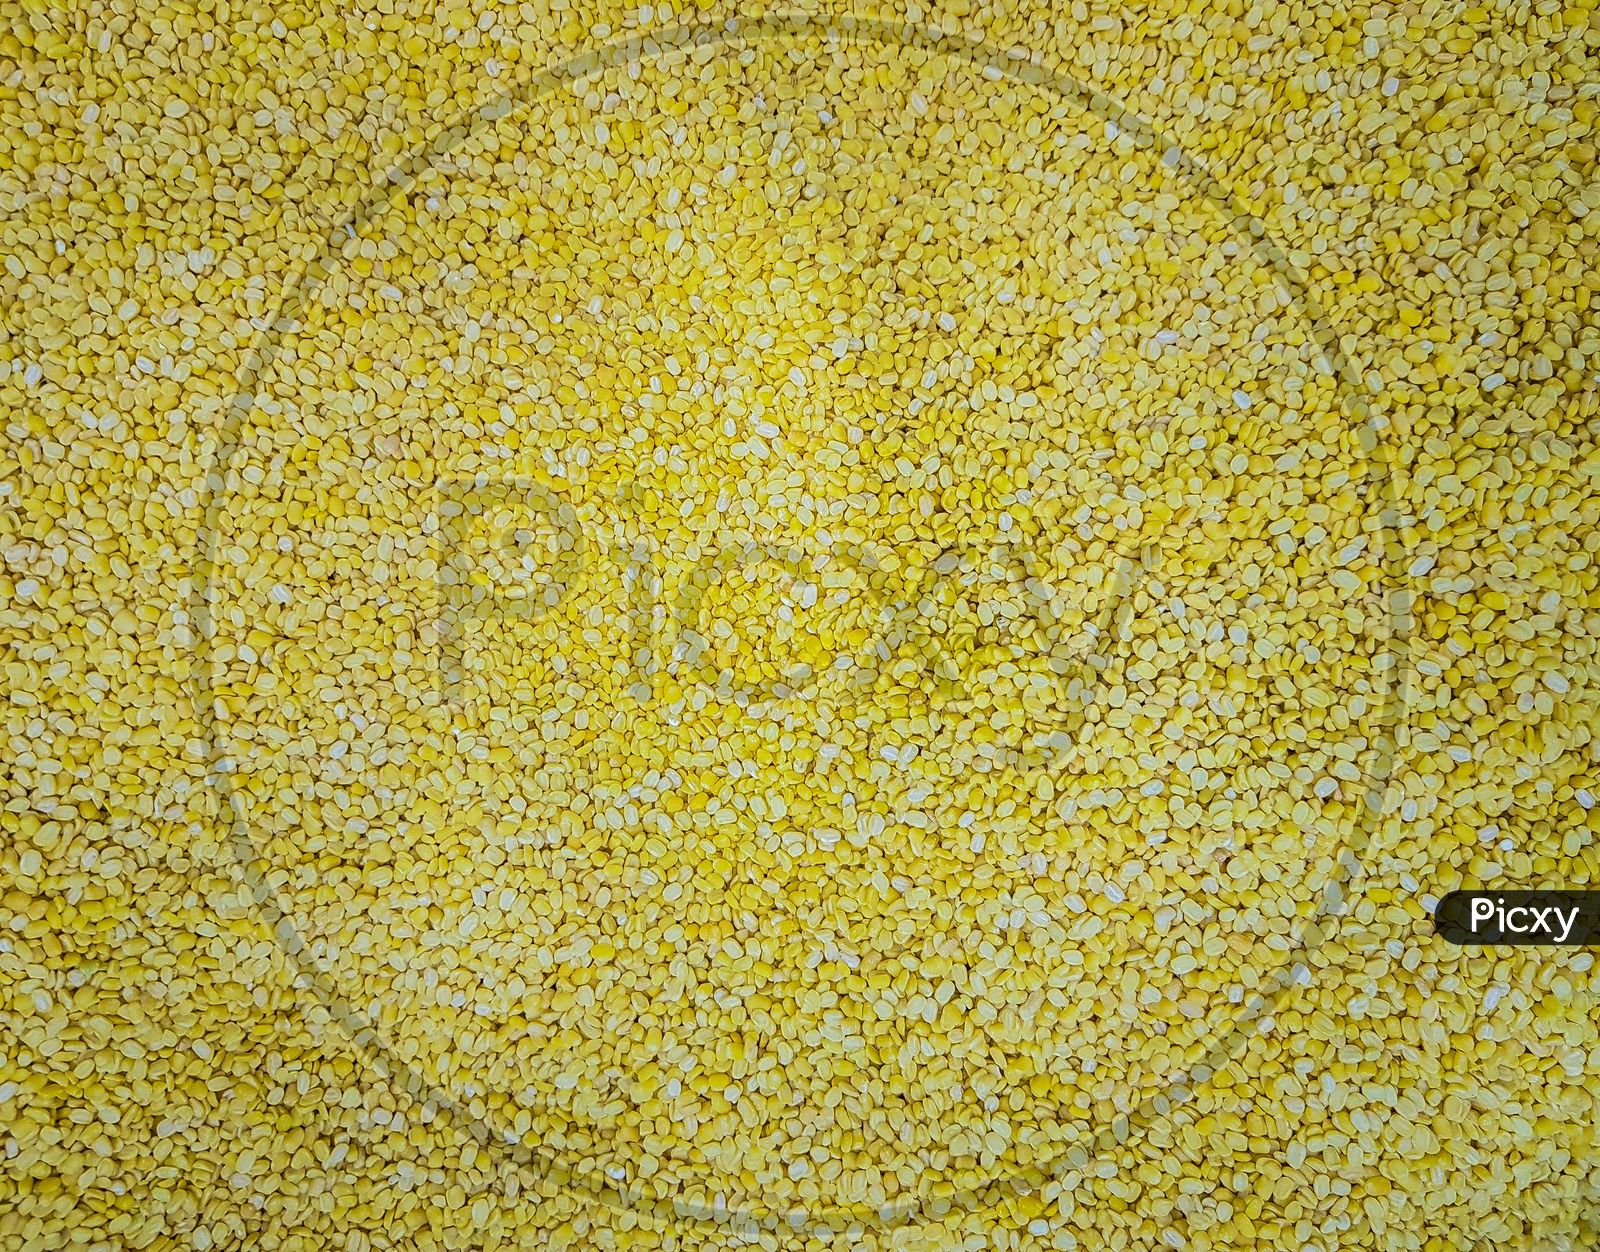 Petite Yellow Mung Lentil Raw Uncooked Beans Moong Dal Close Up. Background Texture